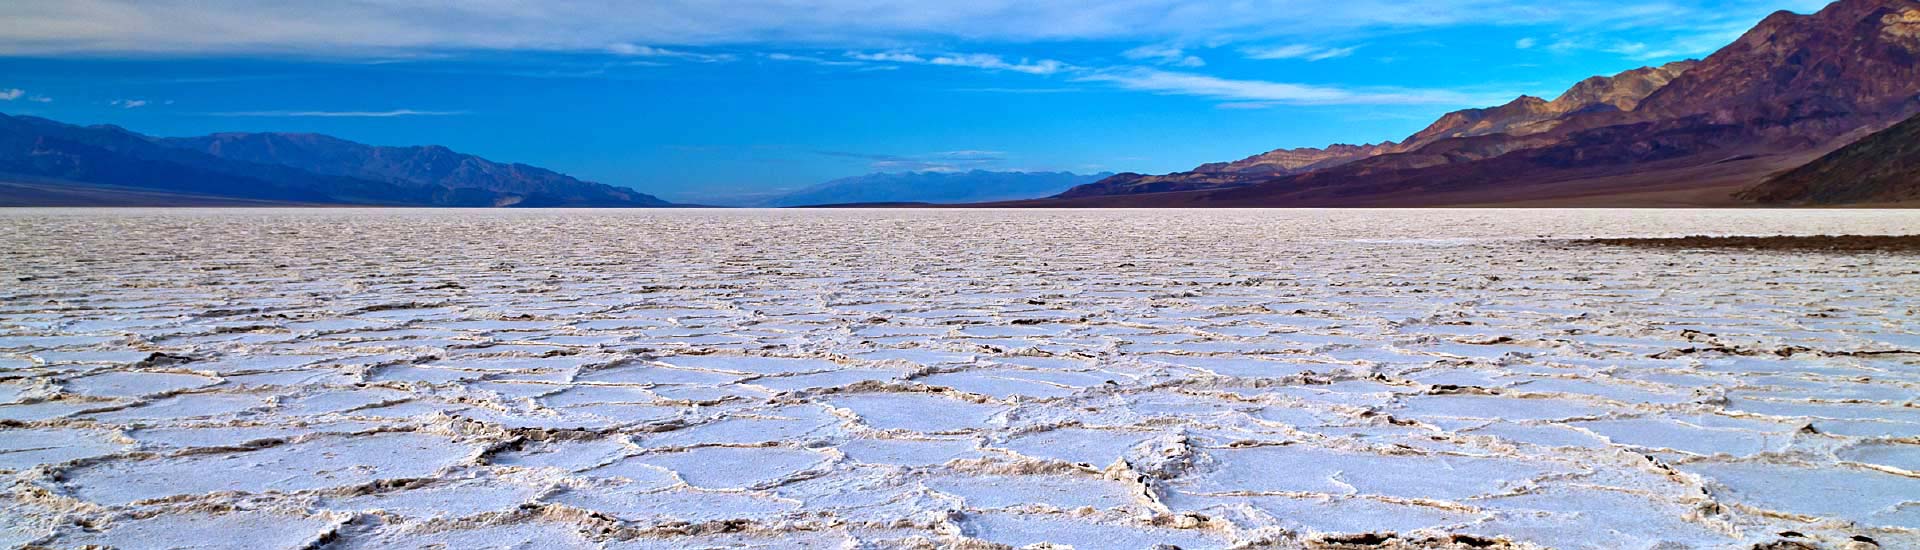  White salt flats at Death Valley National Park with mountain range and blue sky in the distance.